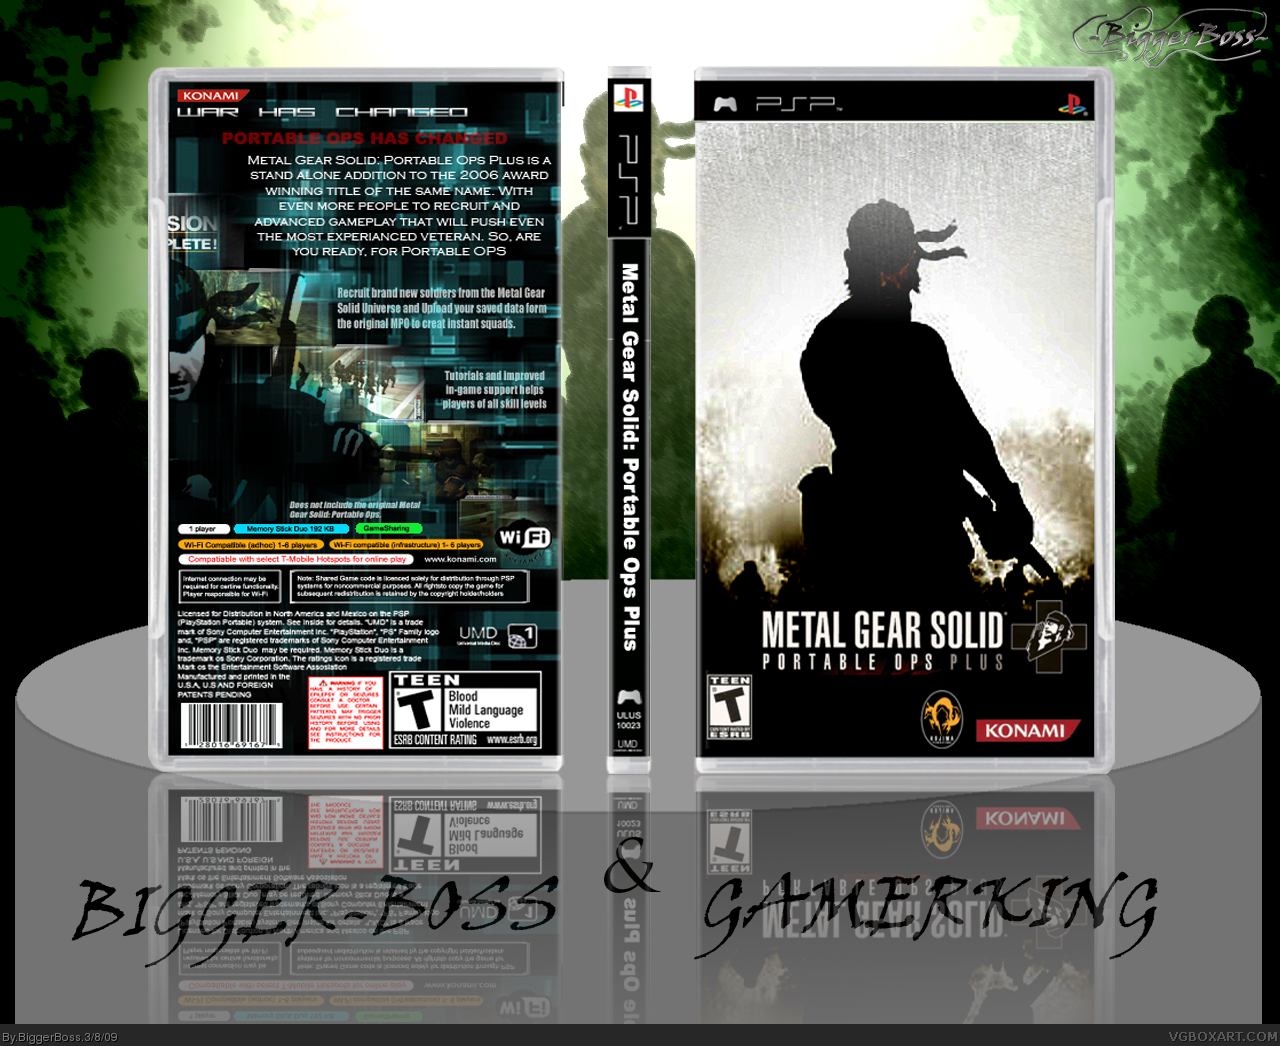 Metal Gear Solid: Portable Ops Plus box cover